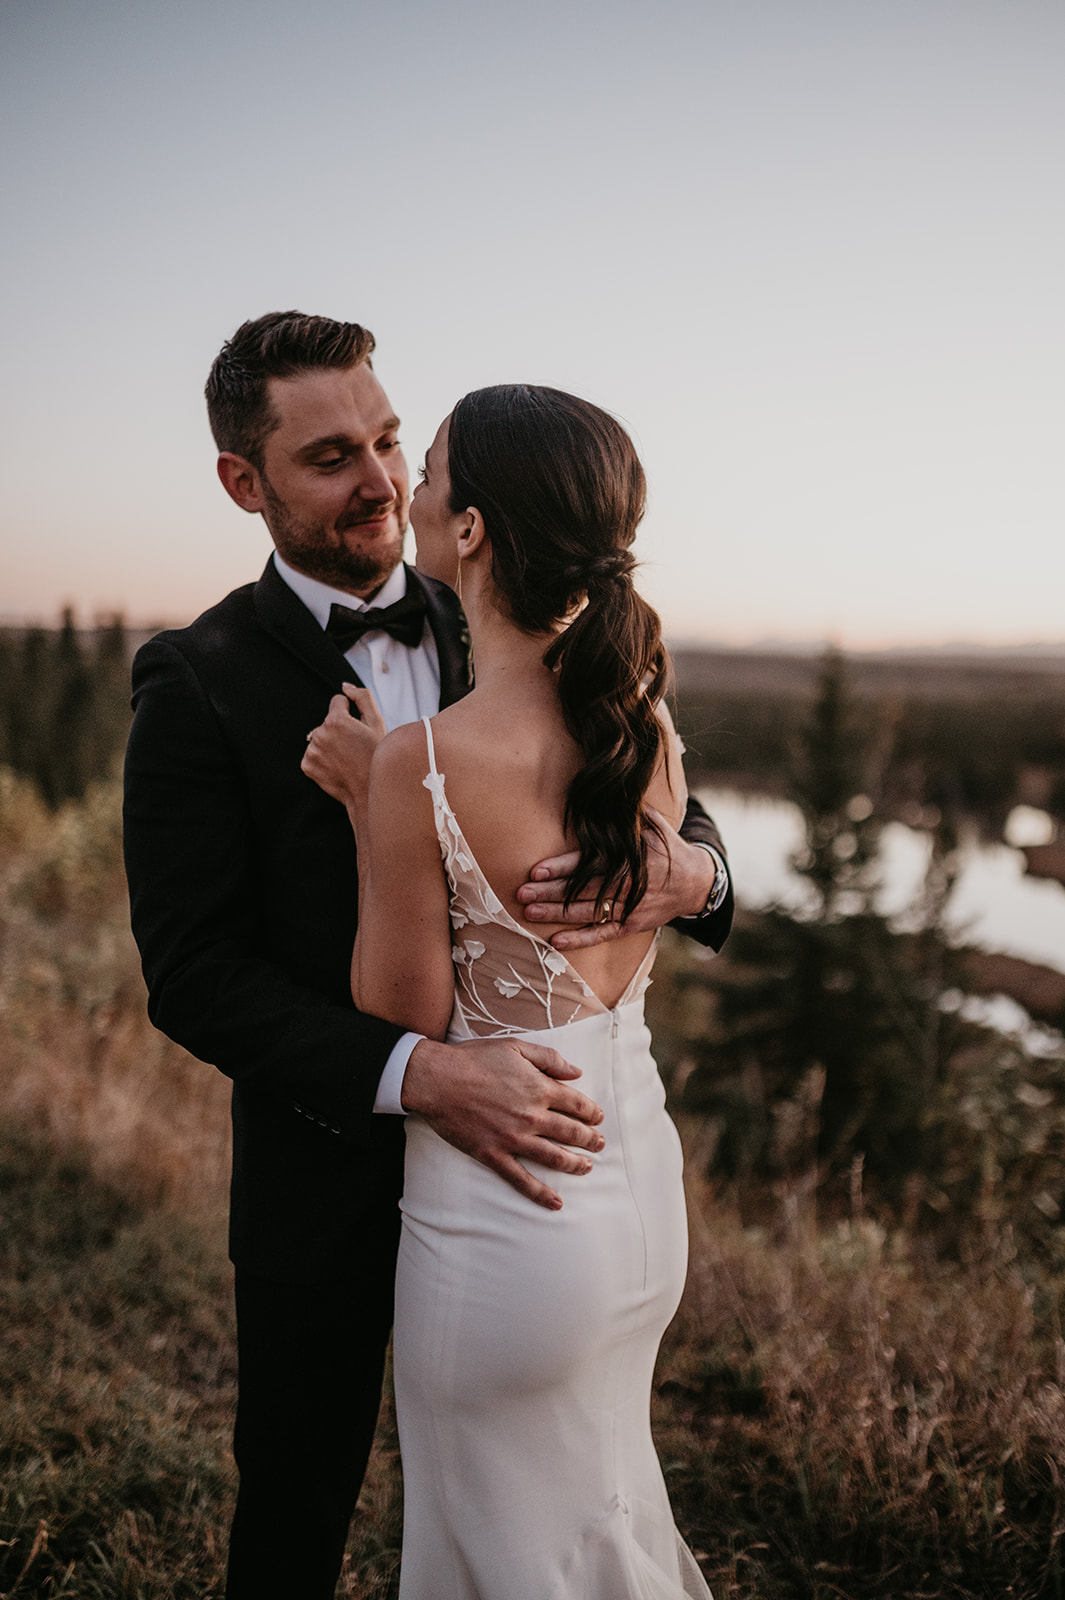 Bride and groom sunset golden hour photos at pinebrook golf course wedding in Calgary Alberta